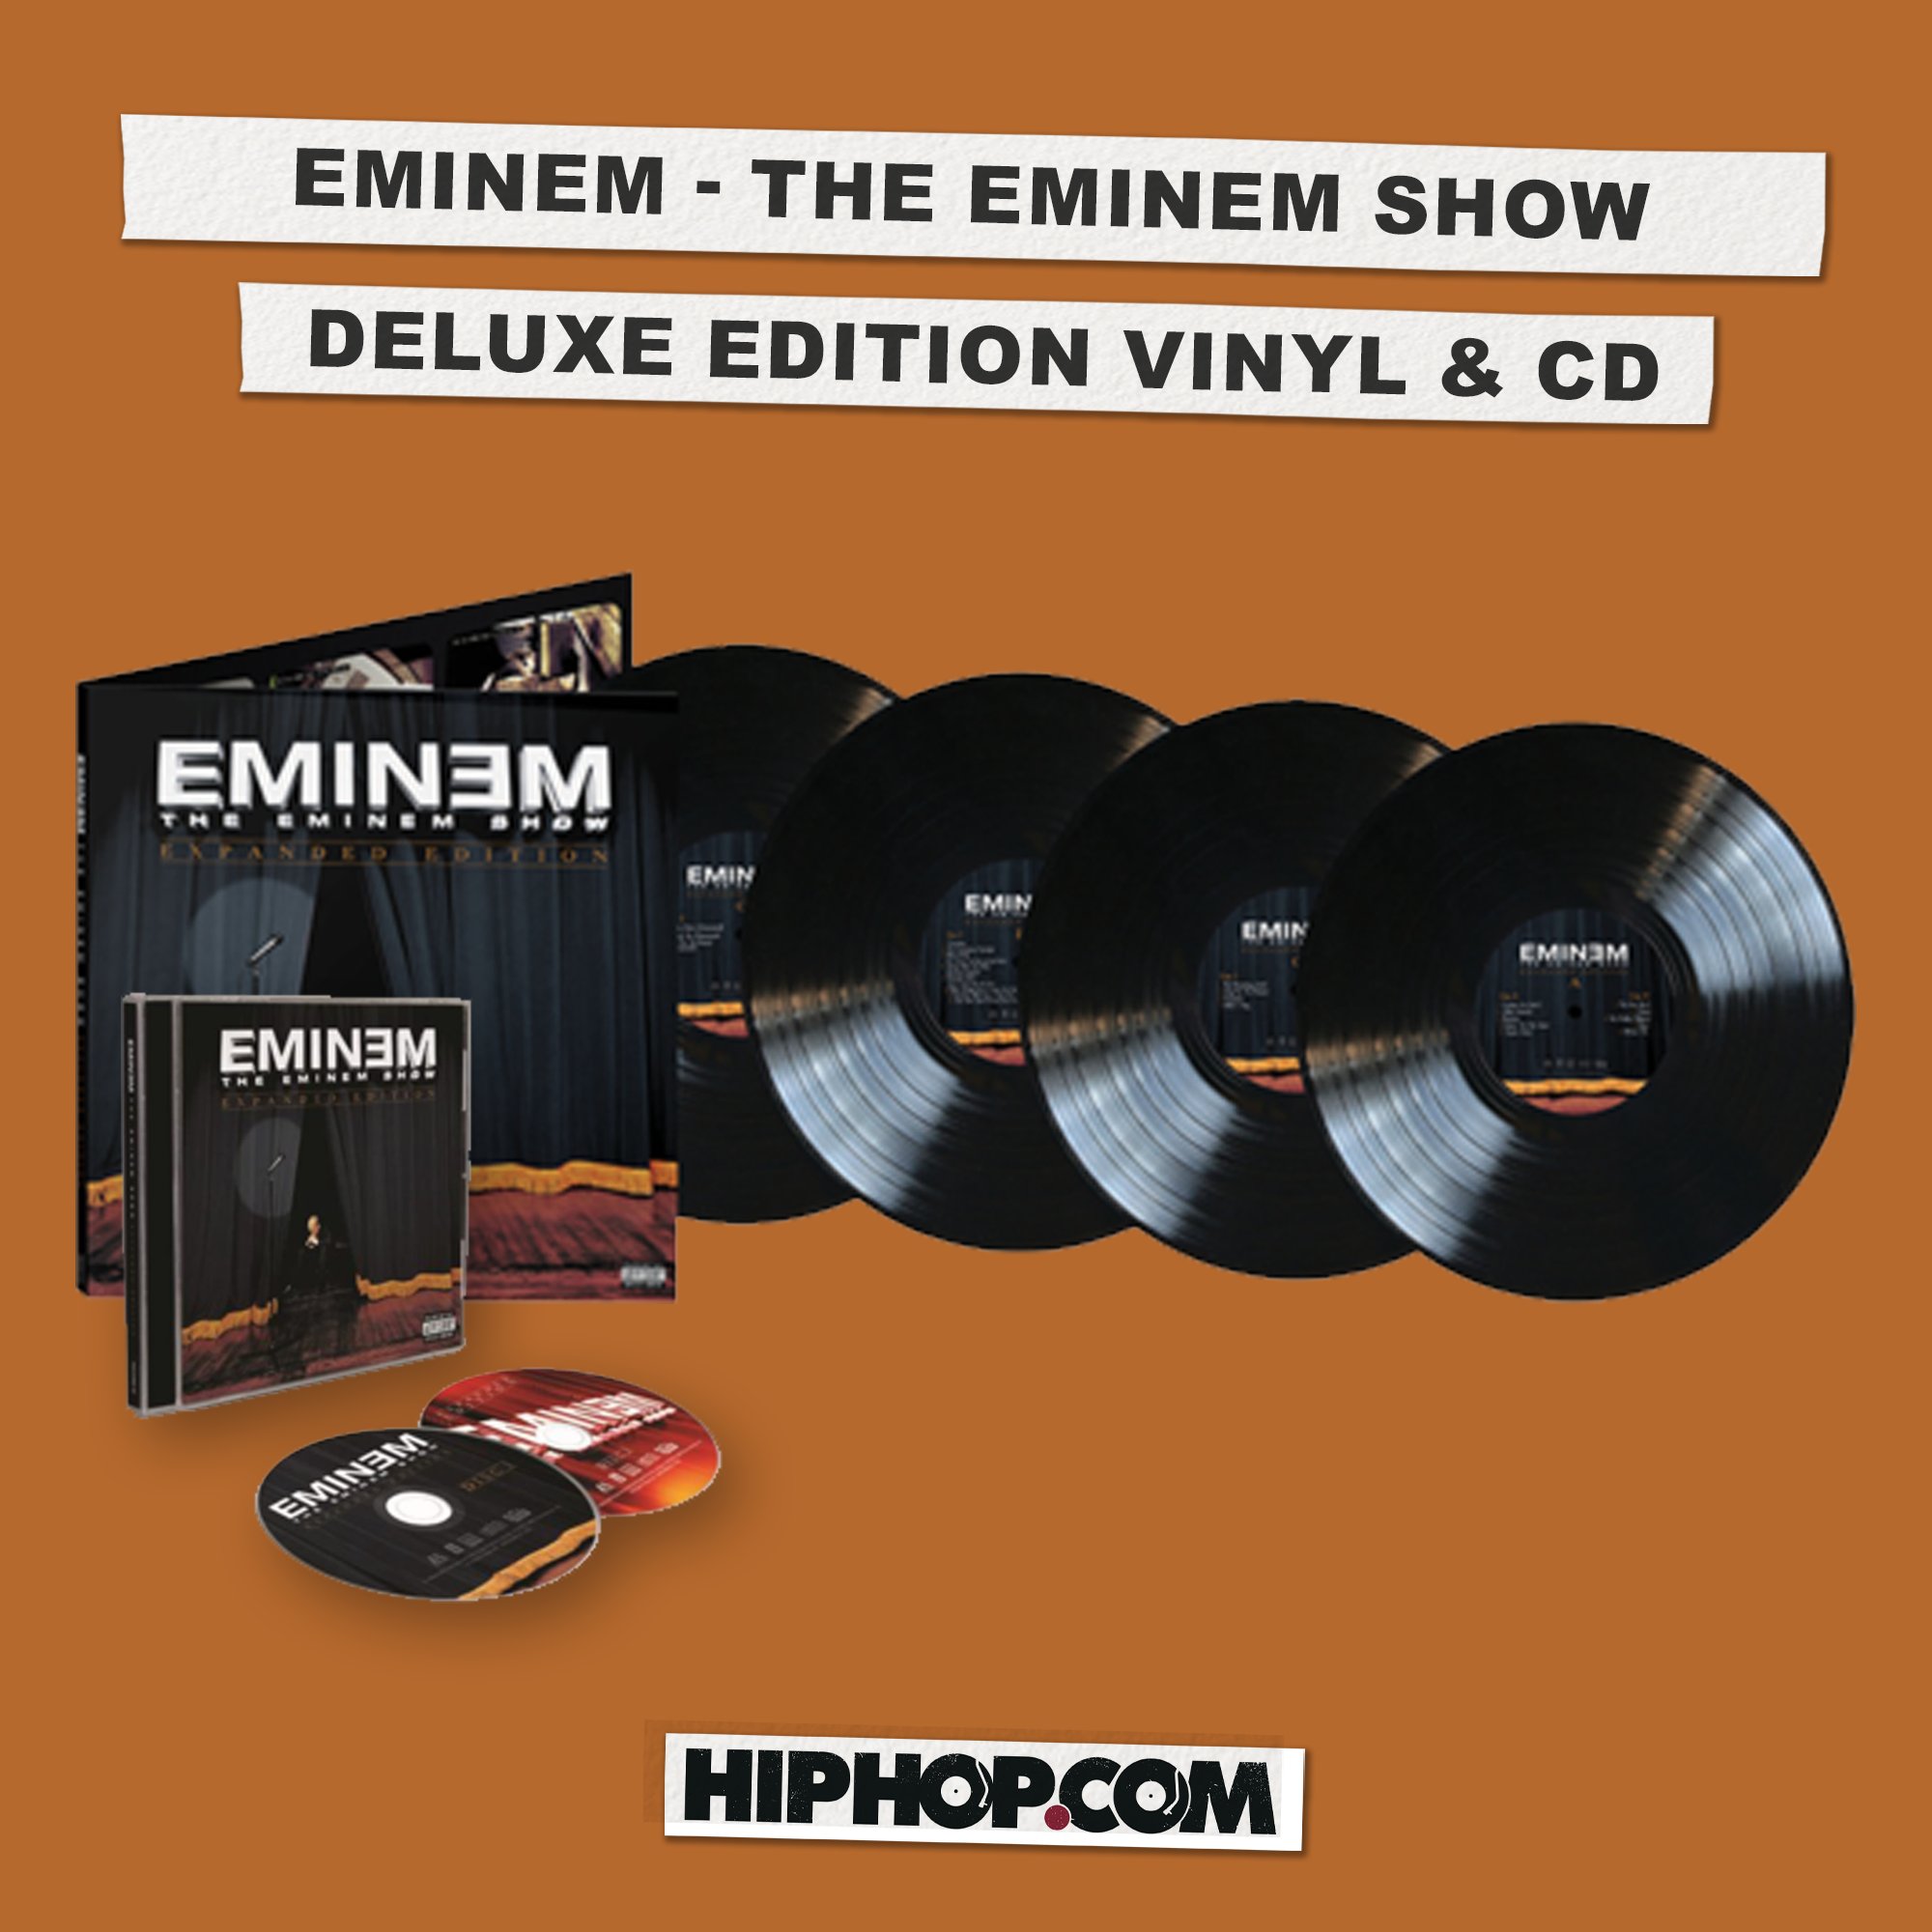 The Eminem Show Expanded Edition Deluxe